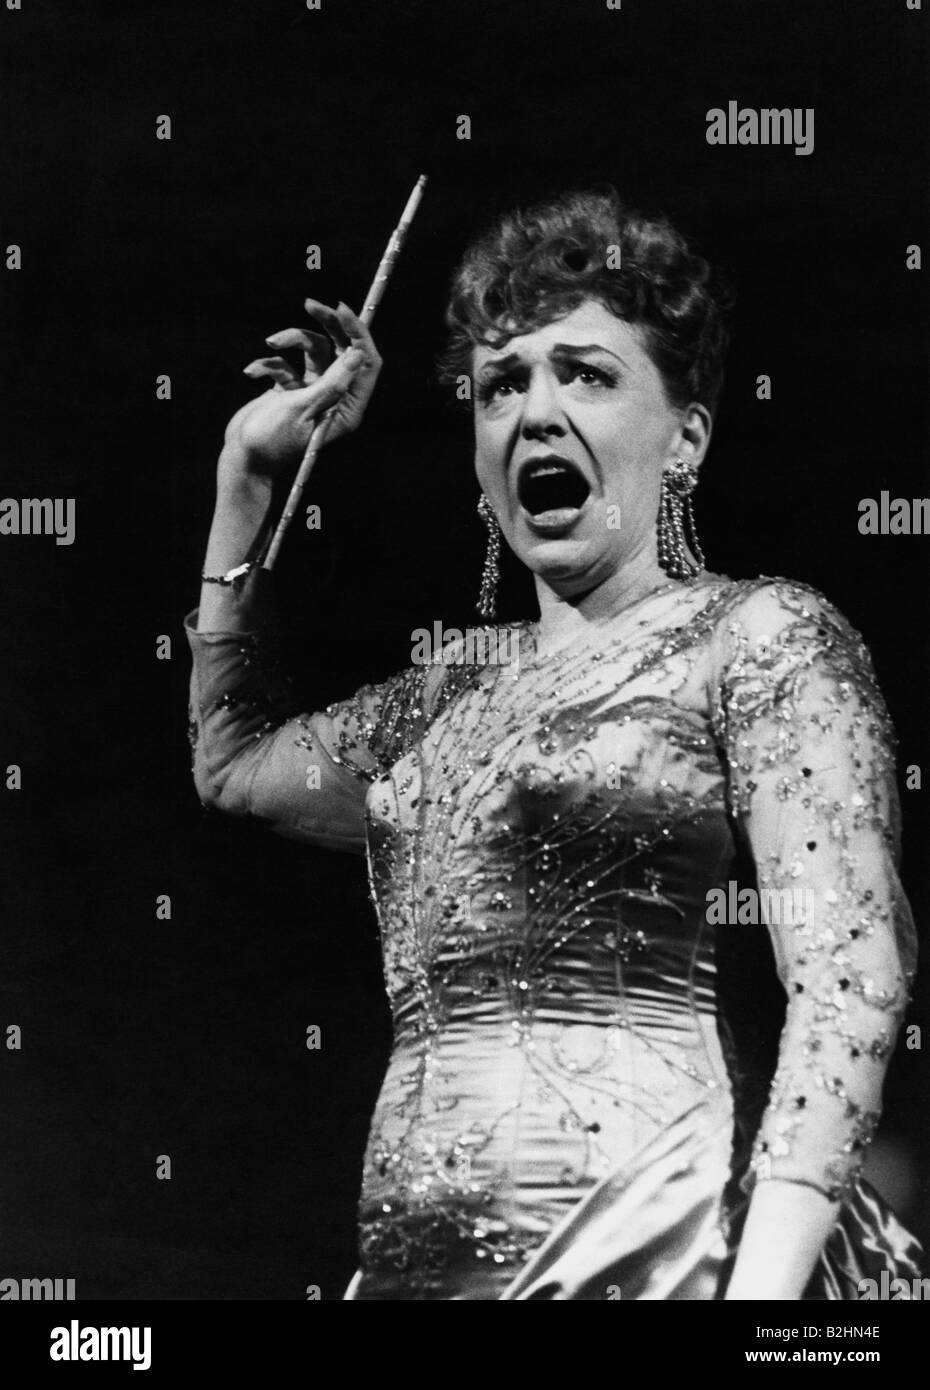 Leander, Zarah, 15.3.1907 - 23.6.1981, Swedish actress and singer, half length, during premiere of play 'Madame Scandaleuse', Deutsches Theater, Munich, Germany, 25.2.1959, Stock Photo